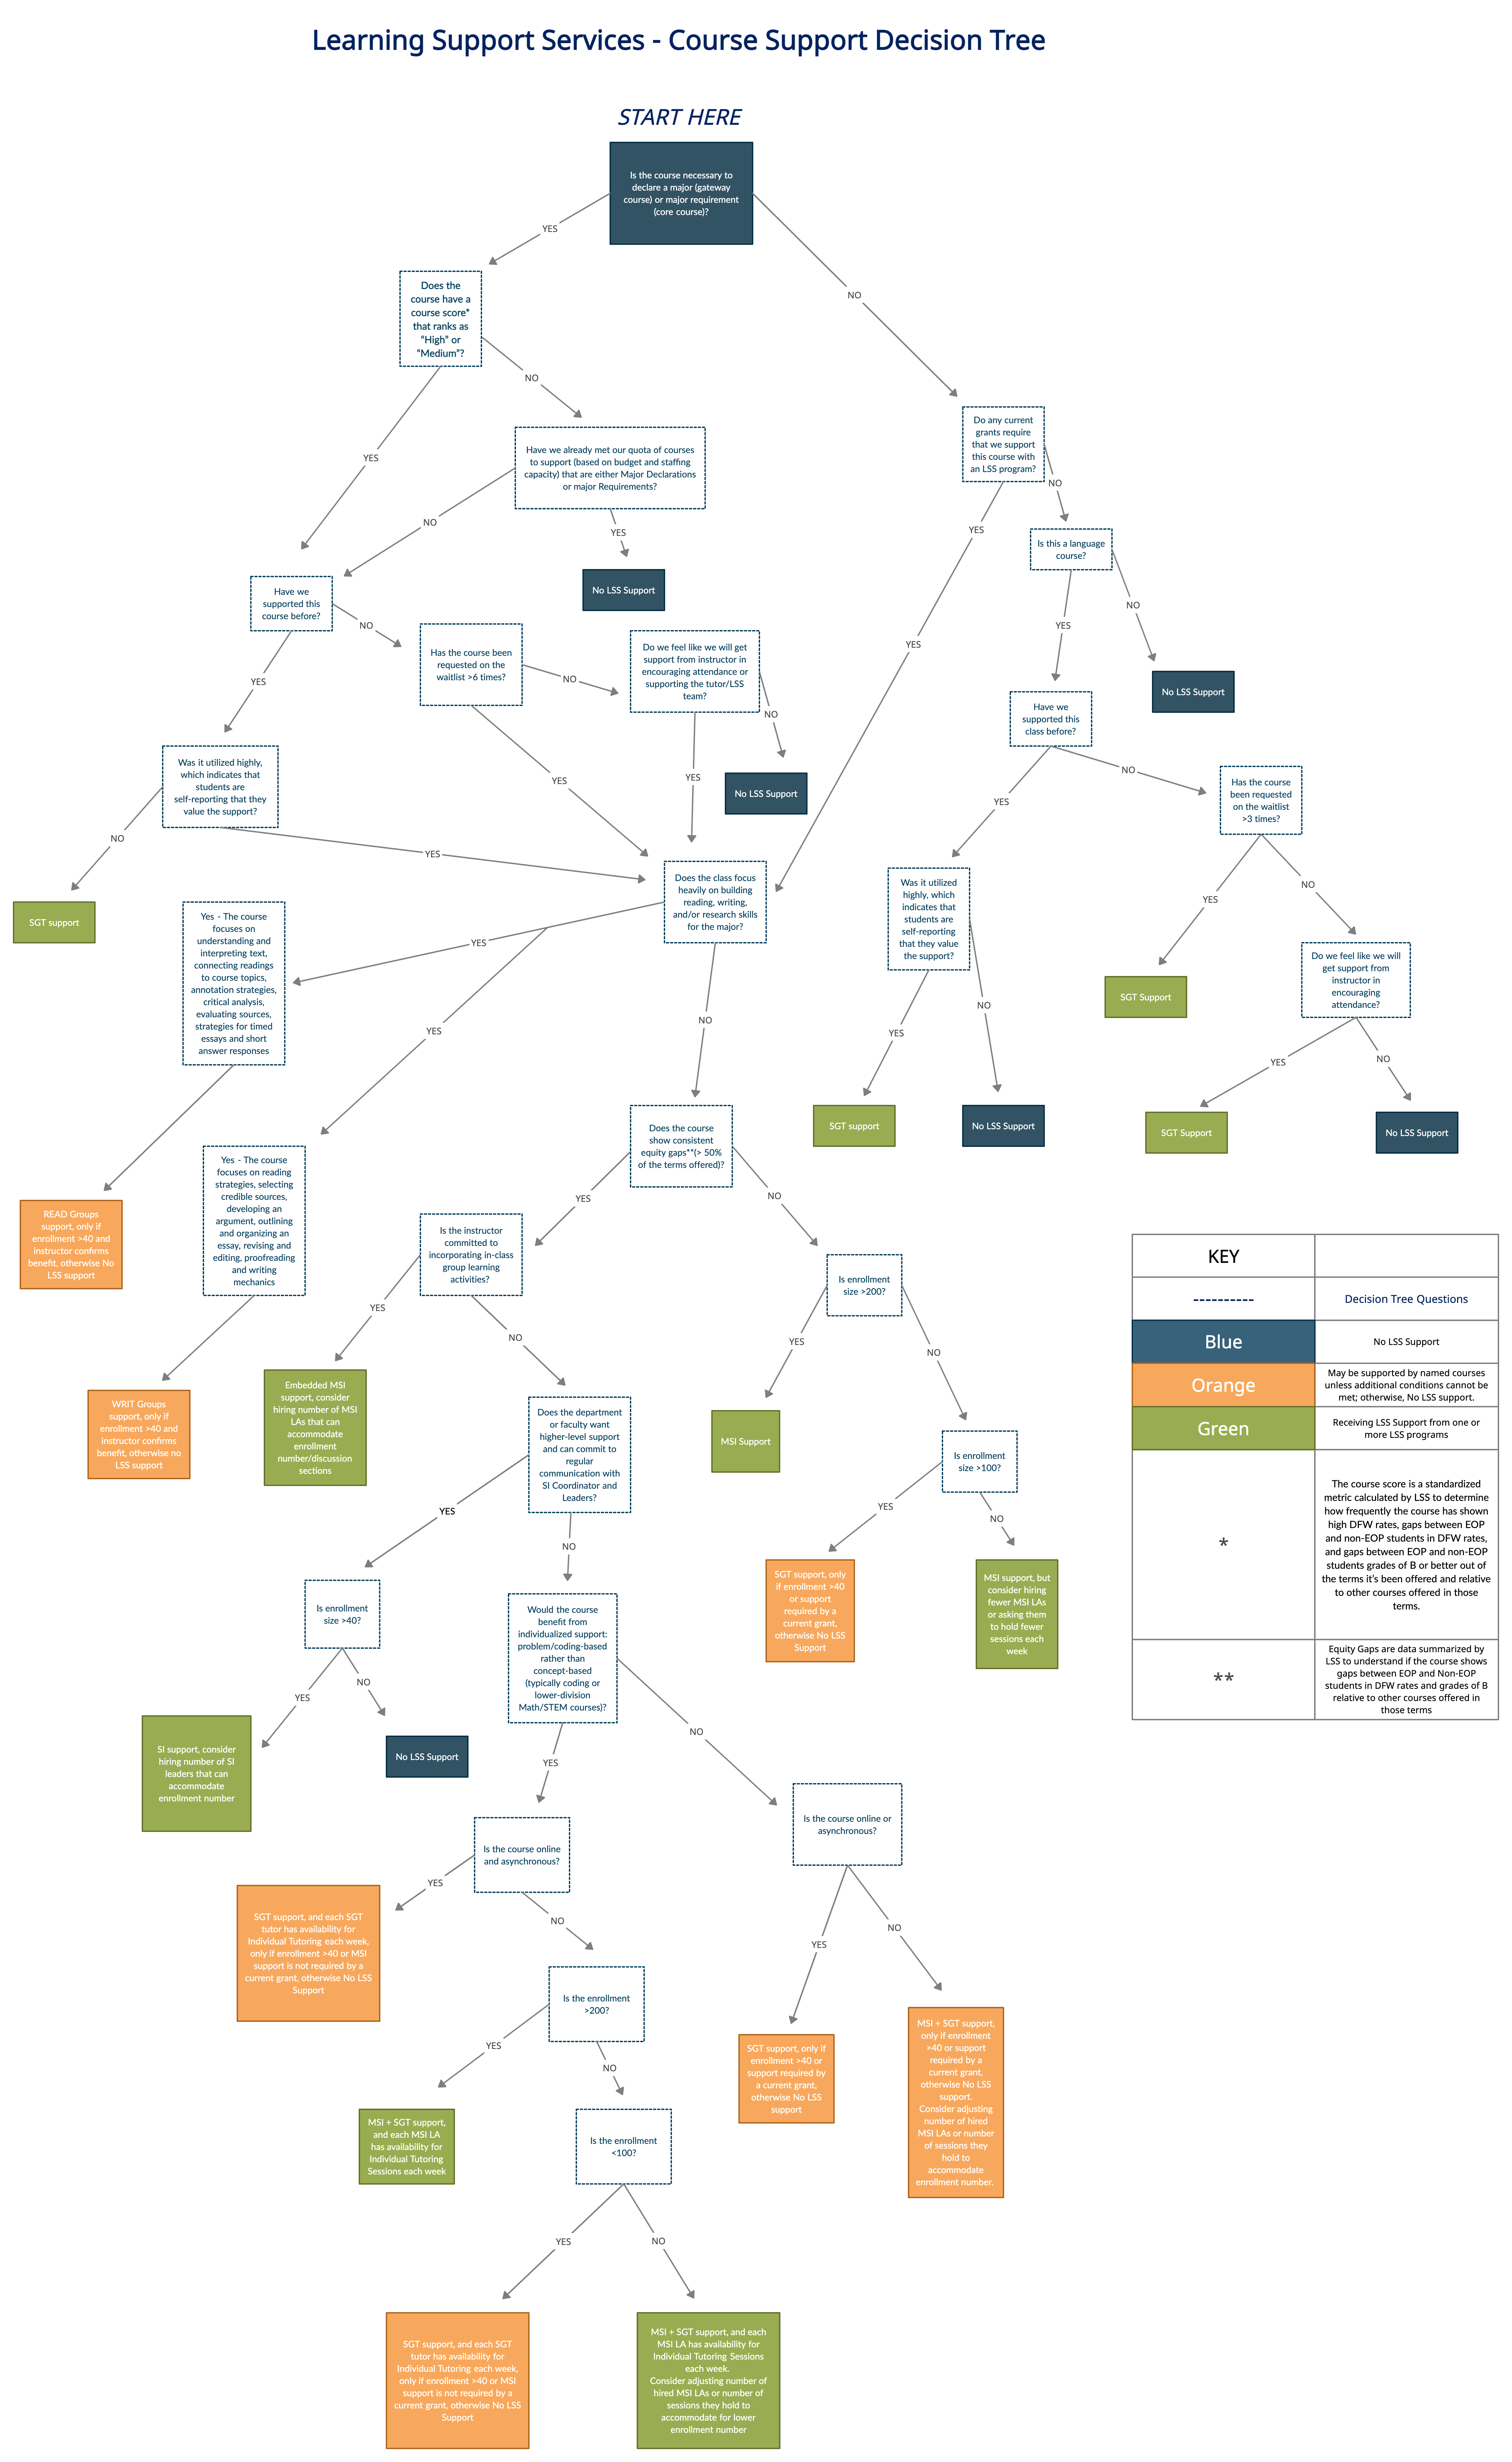 lss-decision-tree---course-support-2.png